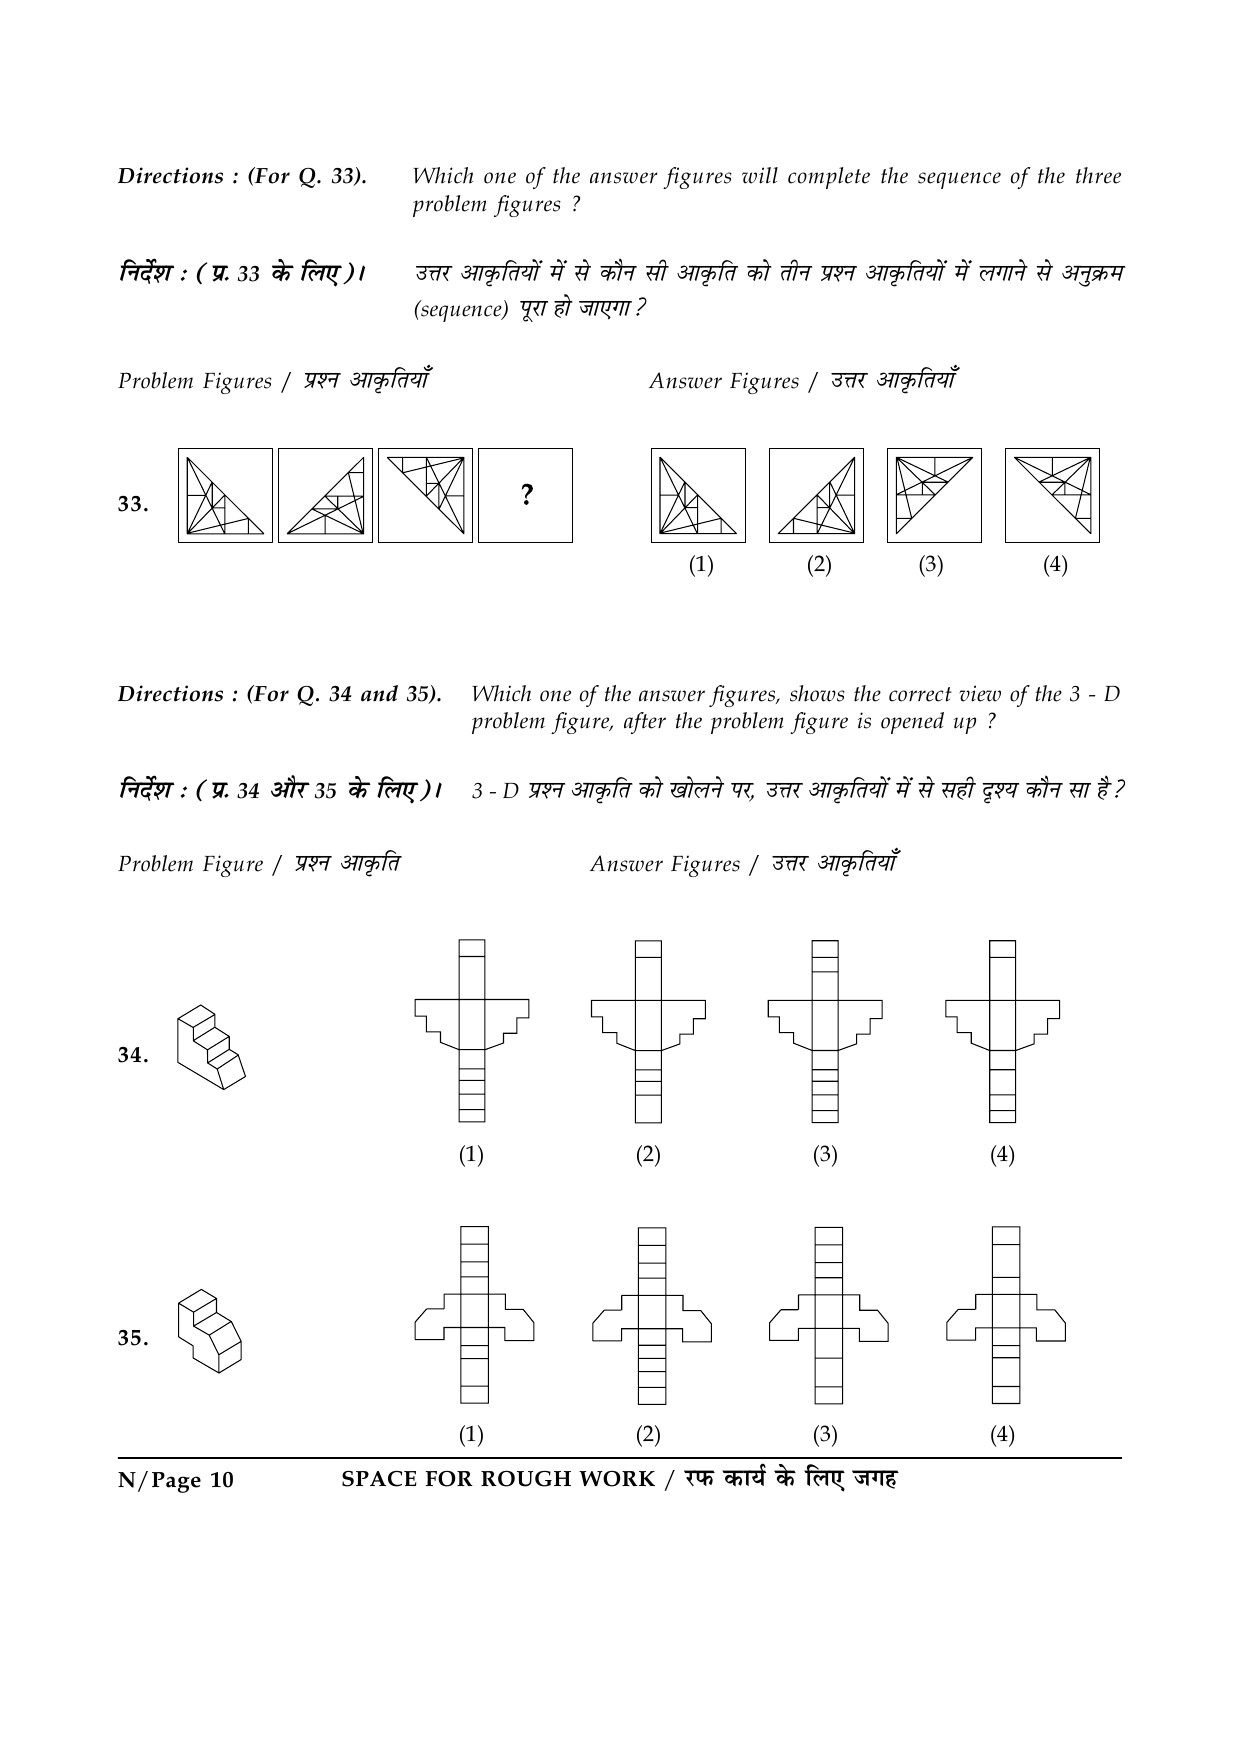 JEE Main Exam Question Paper 2015 Booklet N 10